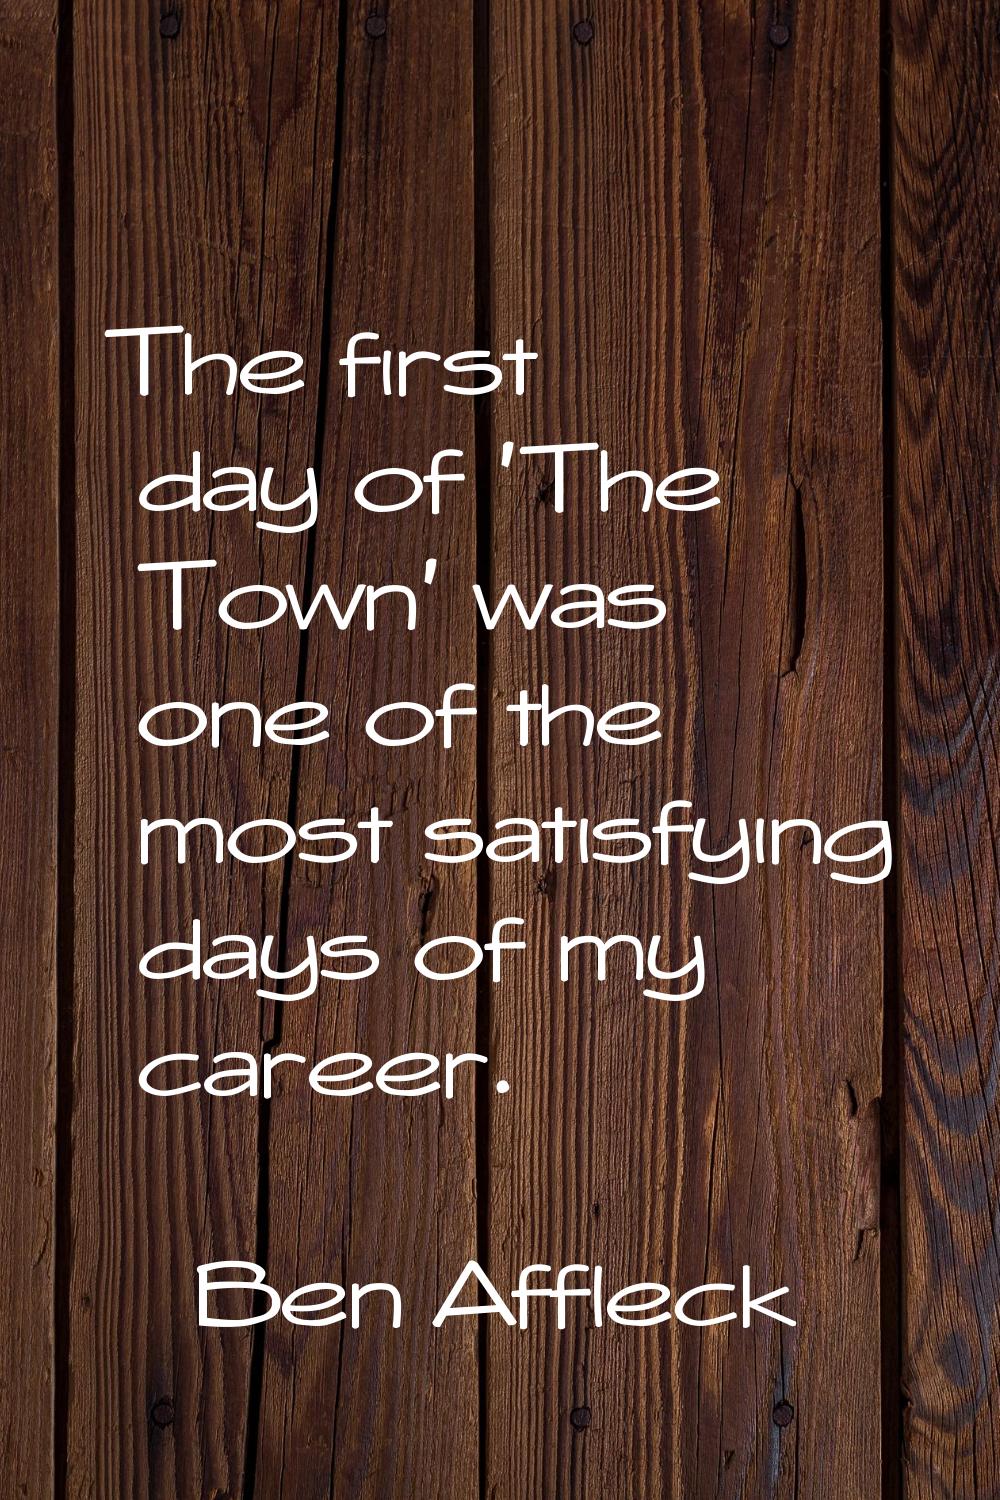 The first day of 'The Town' was one of the most satisfying days of my career.